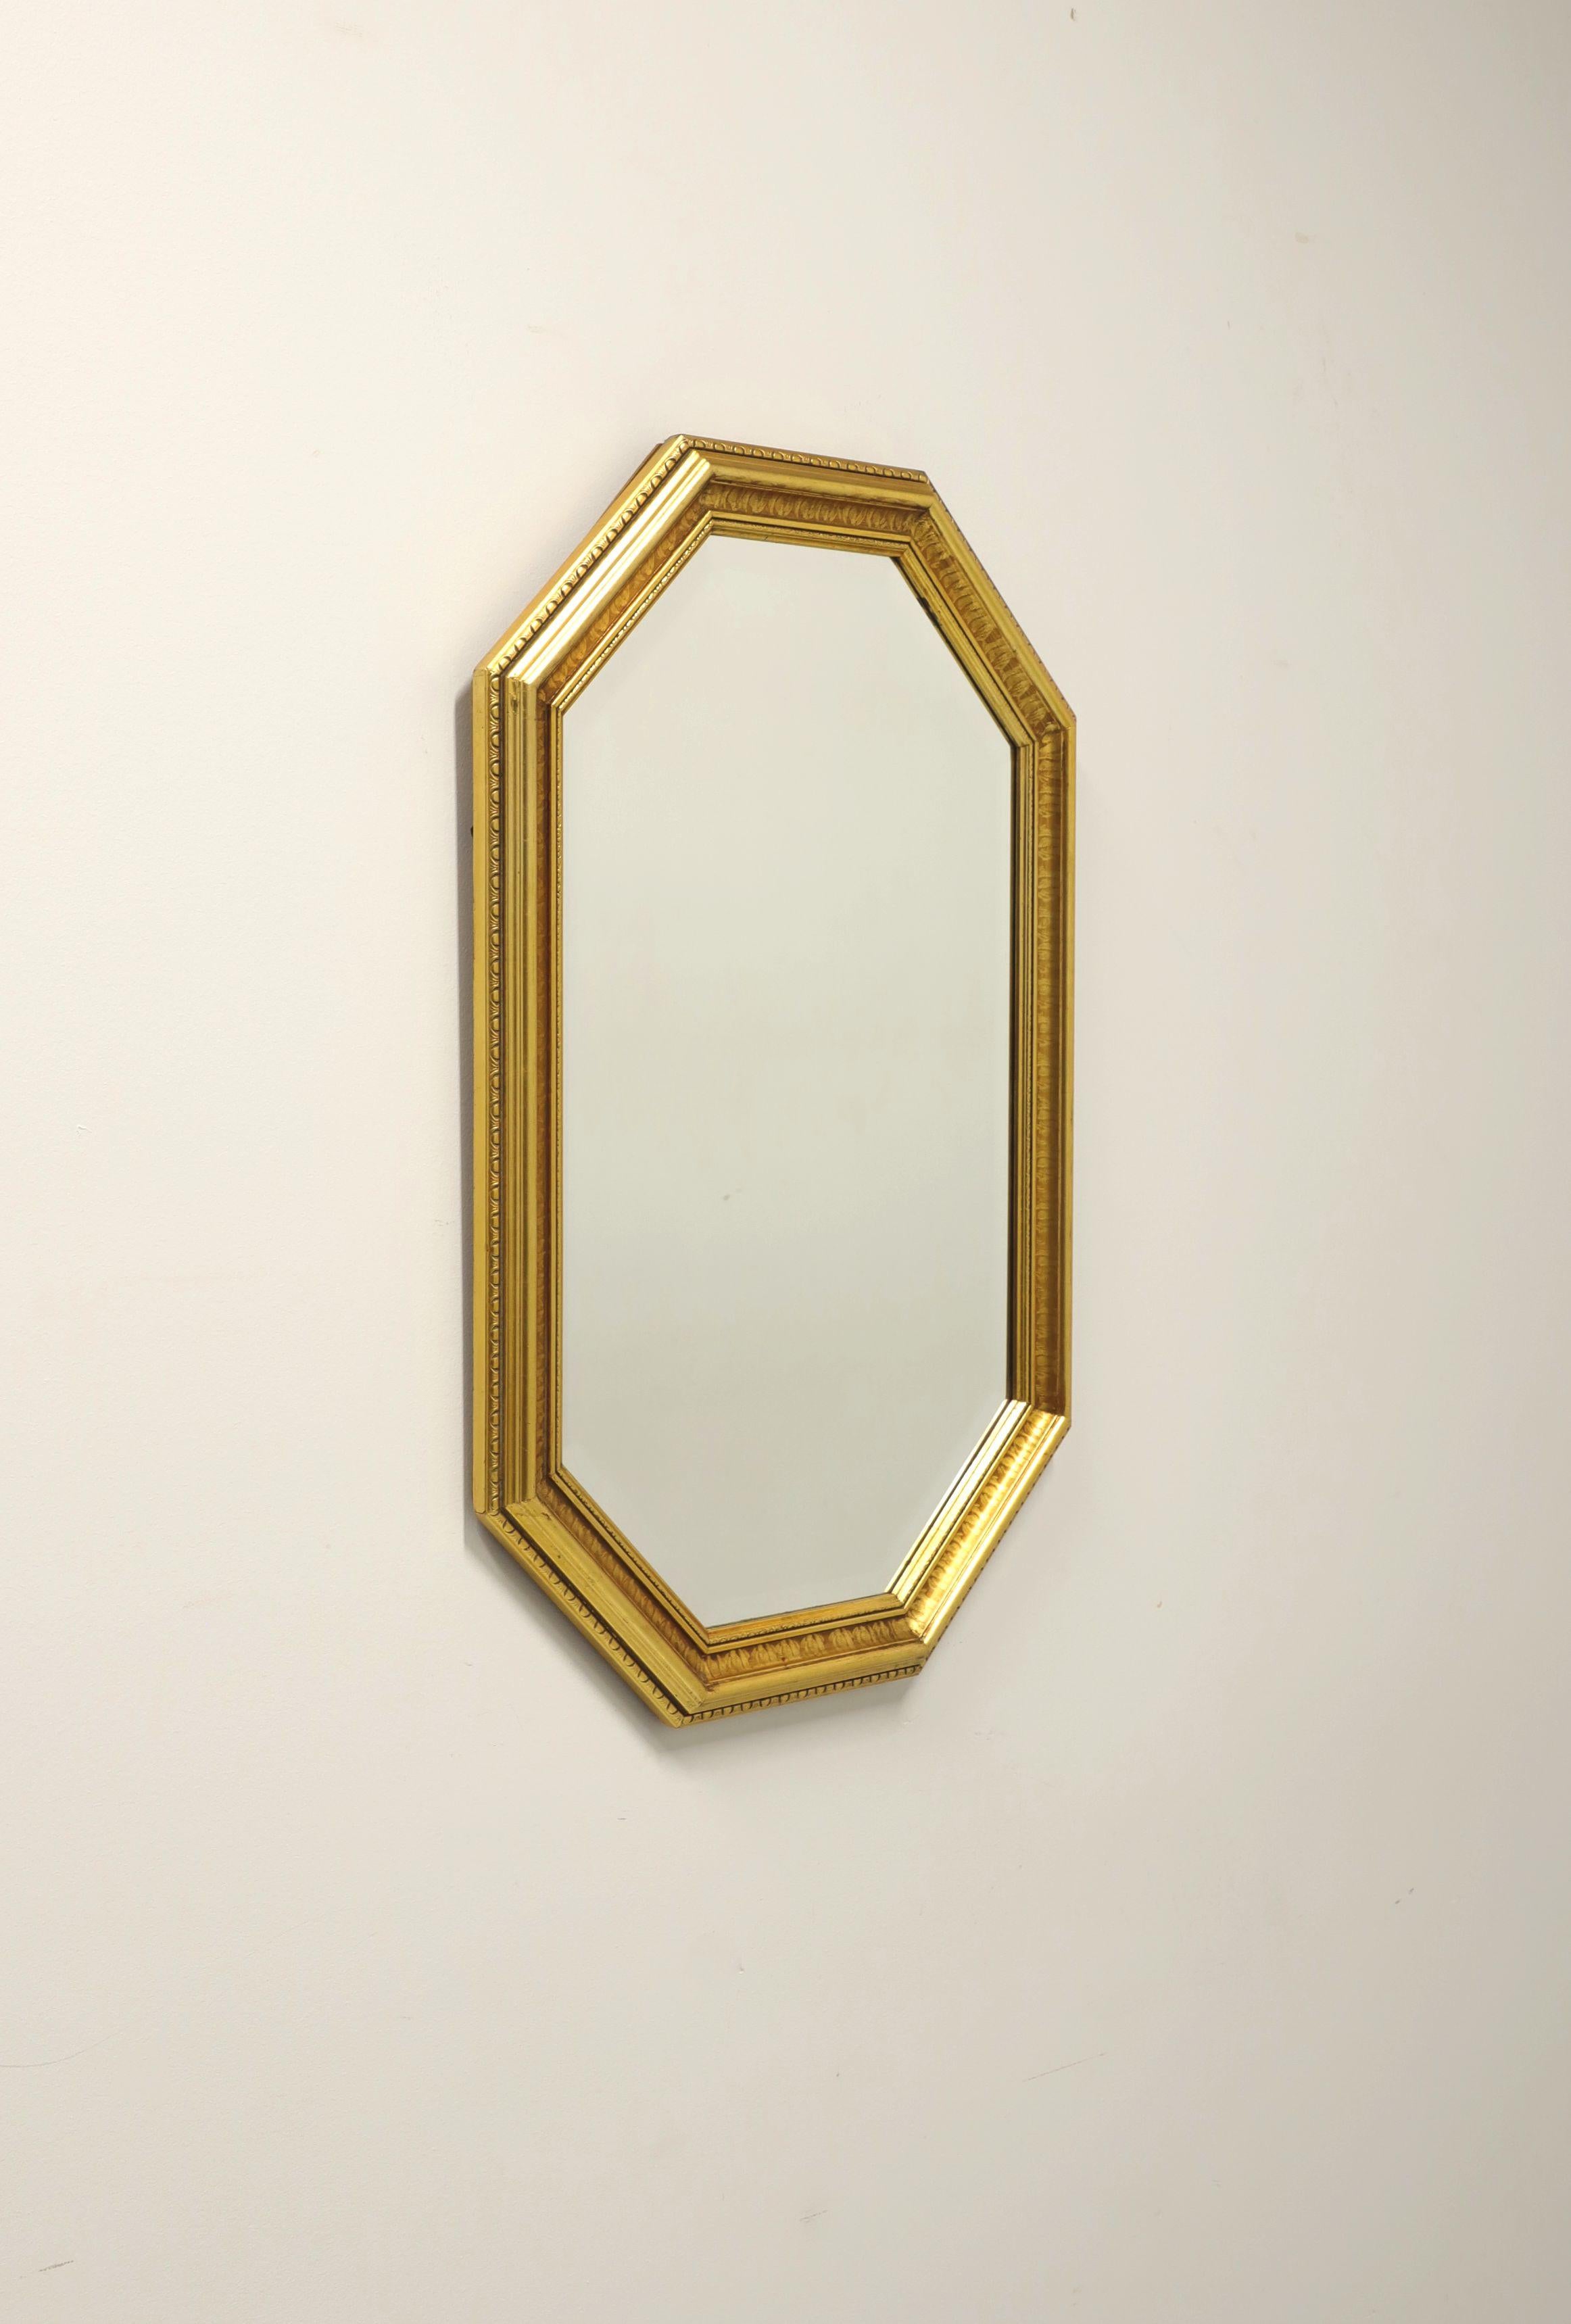 A Traditional style wall mirror by Carolina Mirror. Beveled edge mirrored glass in a gold painted solid wood frame. Features an octagonal shape with decorative detail to frame. Made in North Carolina, USA, in the late 20th Century.

Measures: 31 W 1